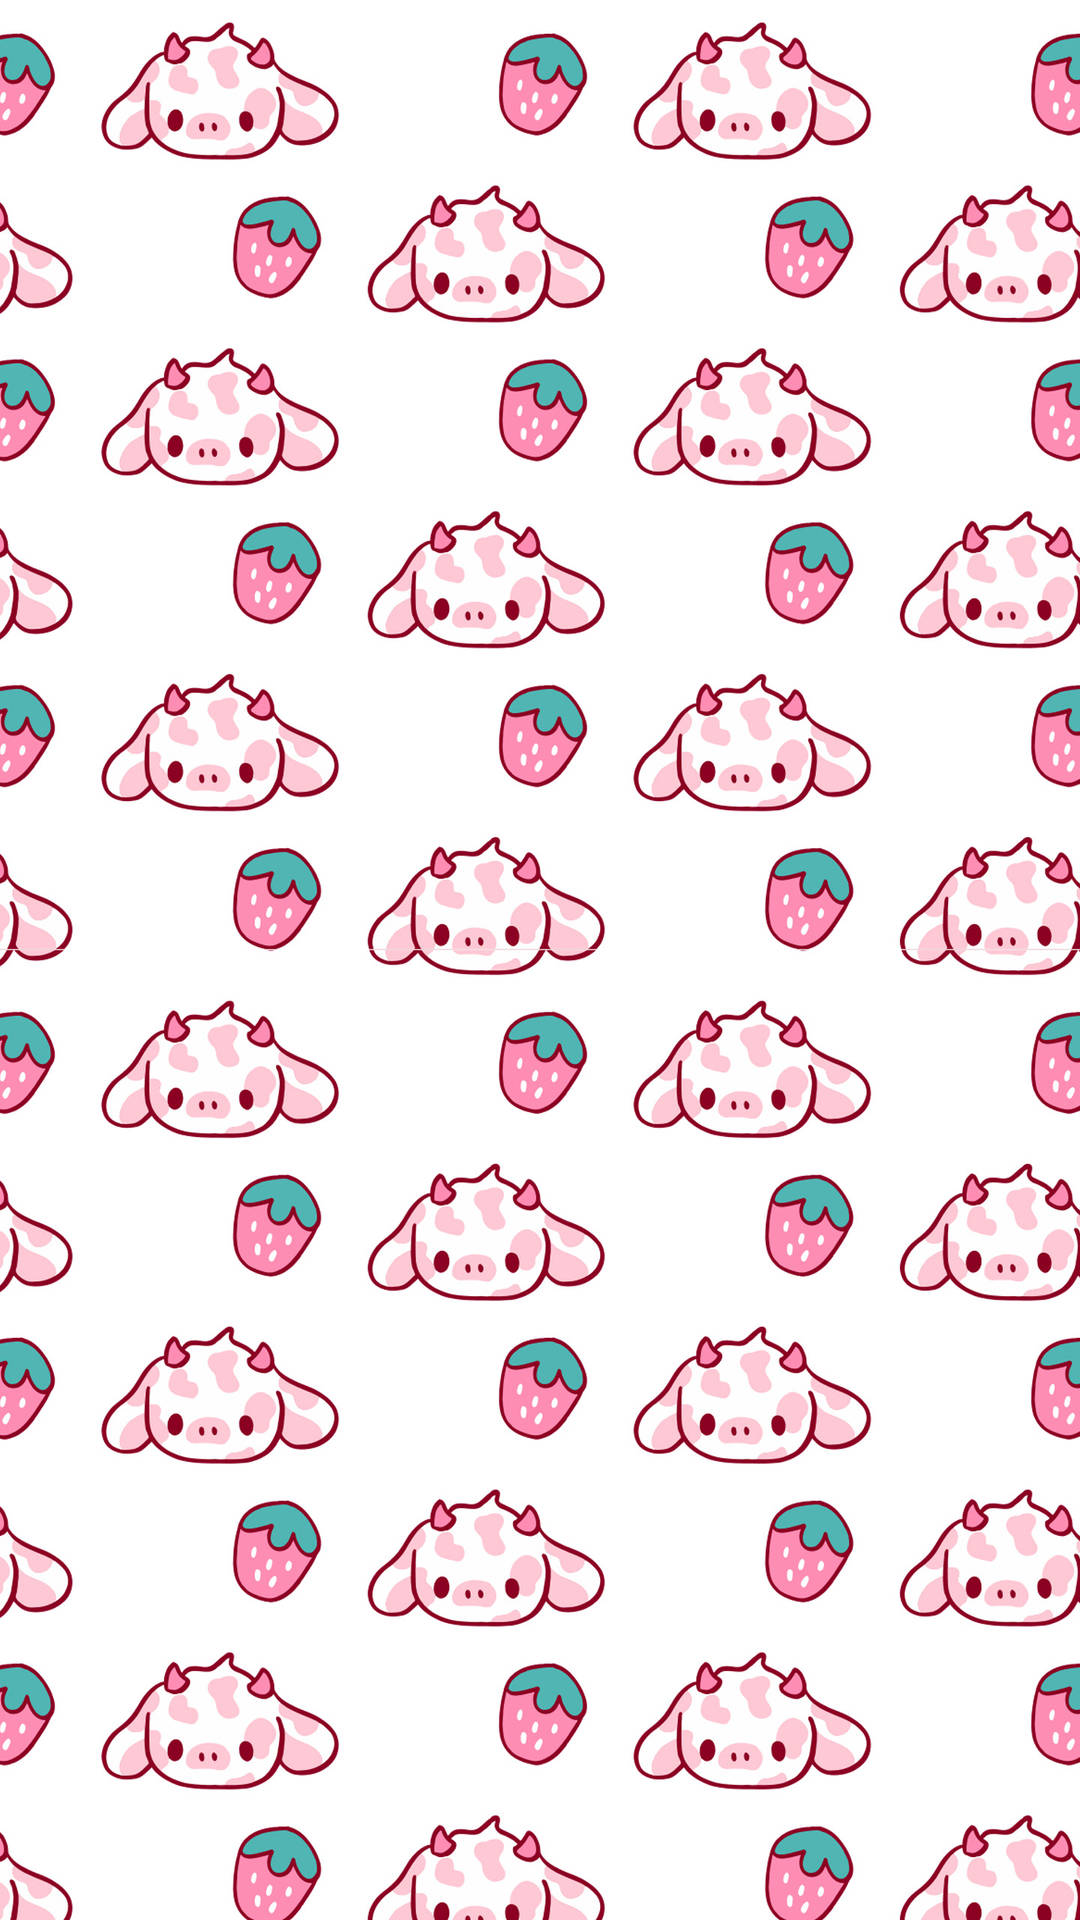  Strawberry Cow  Look at you strawberry cow you make me go wow her  little strawberry stalk hat is my fave and her strawberry spots   Instagram